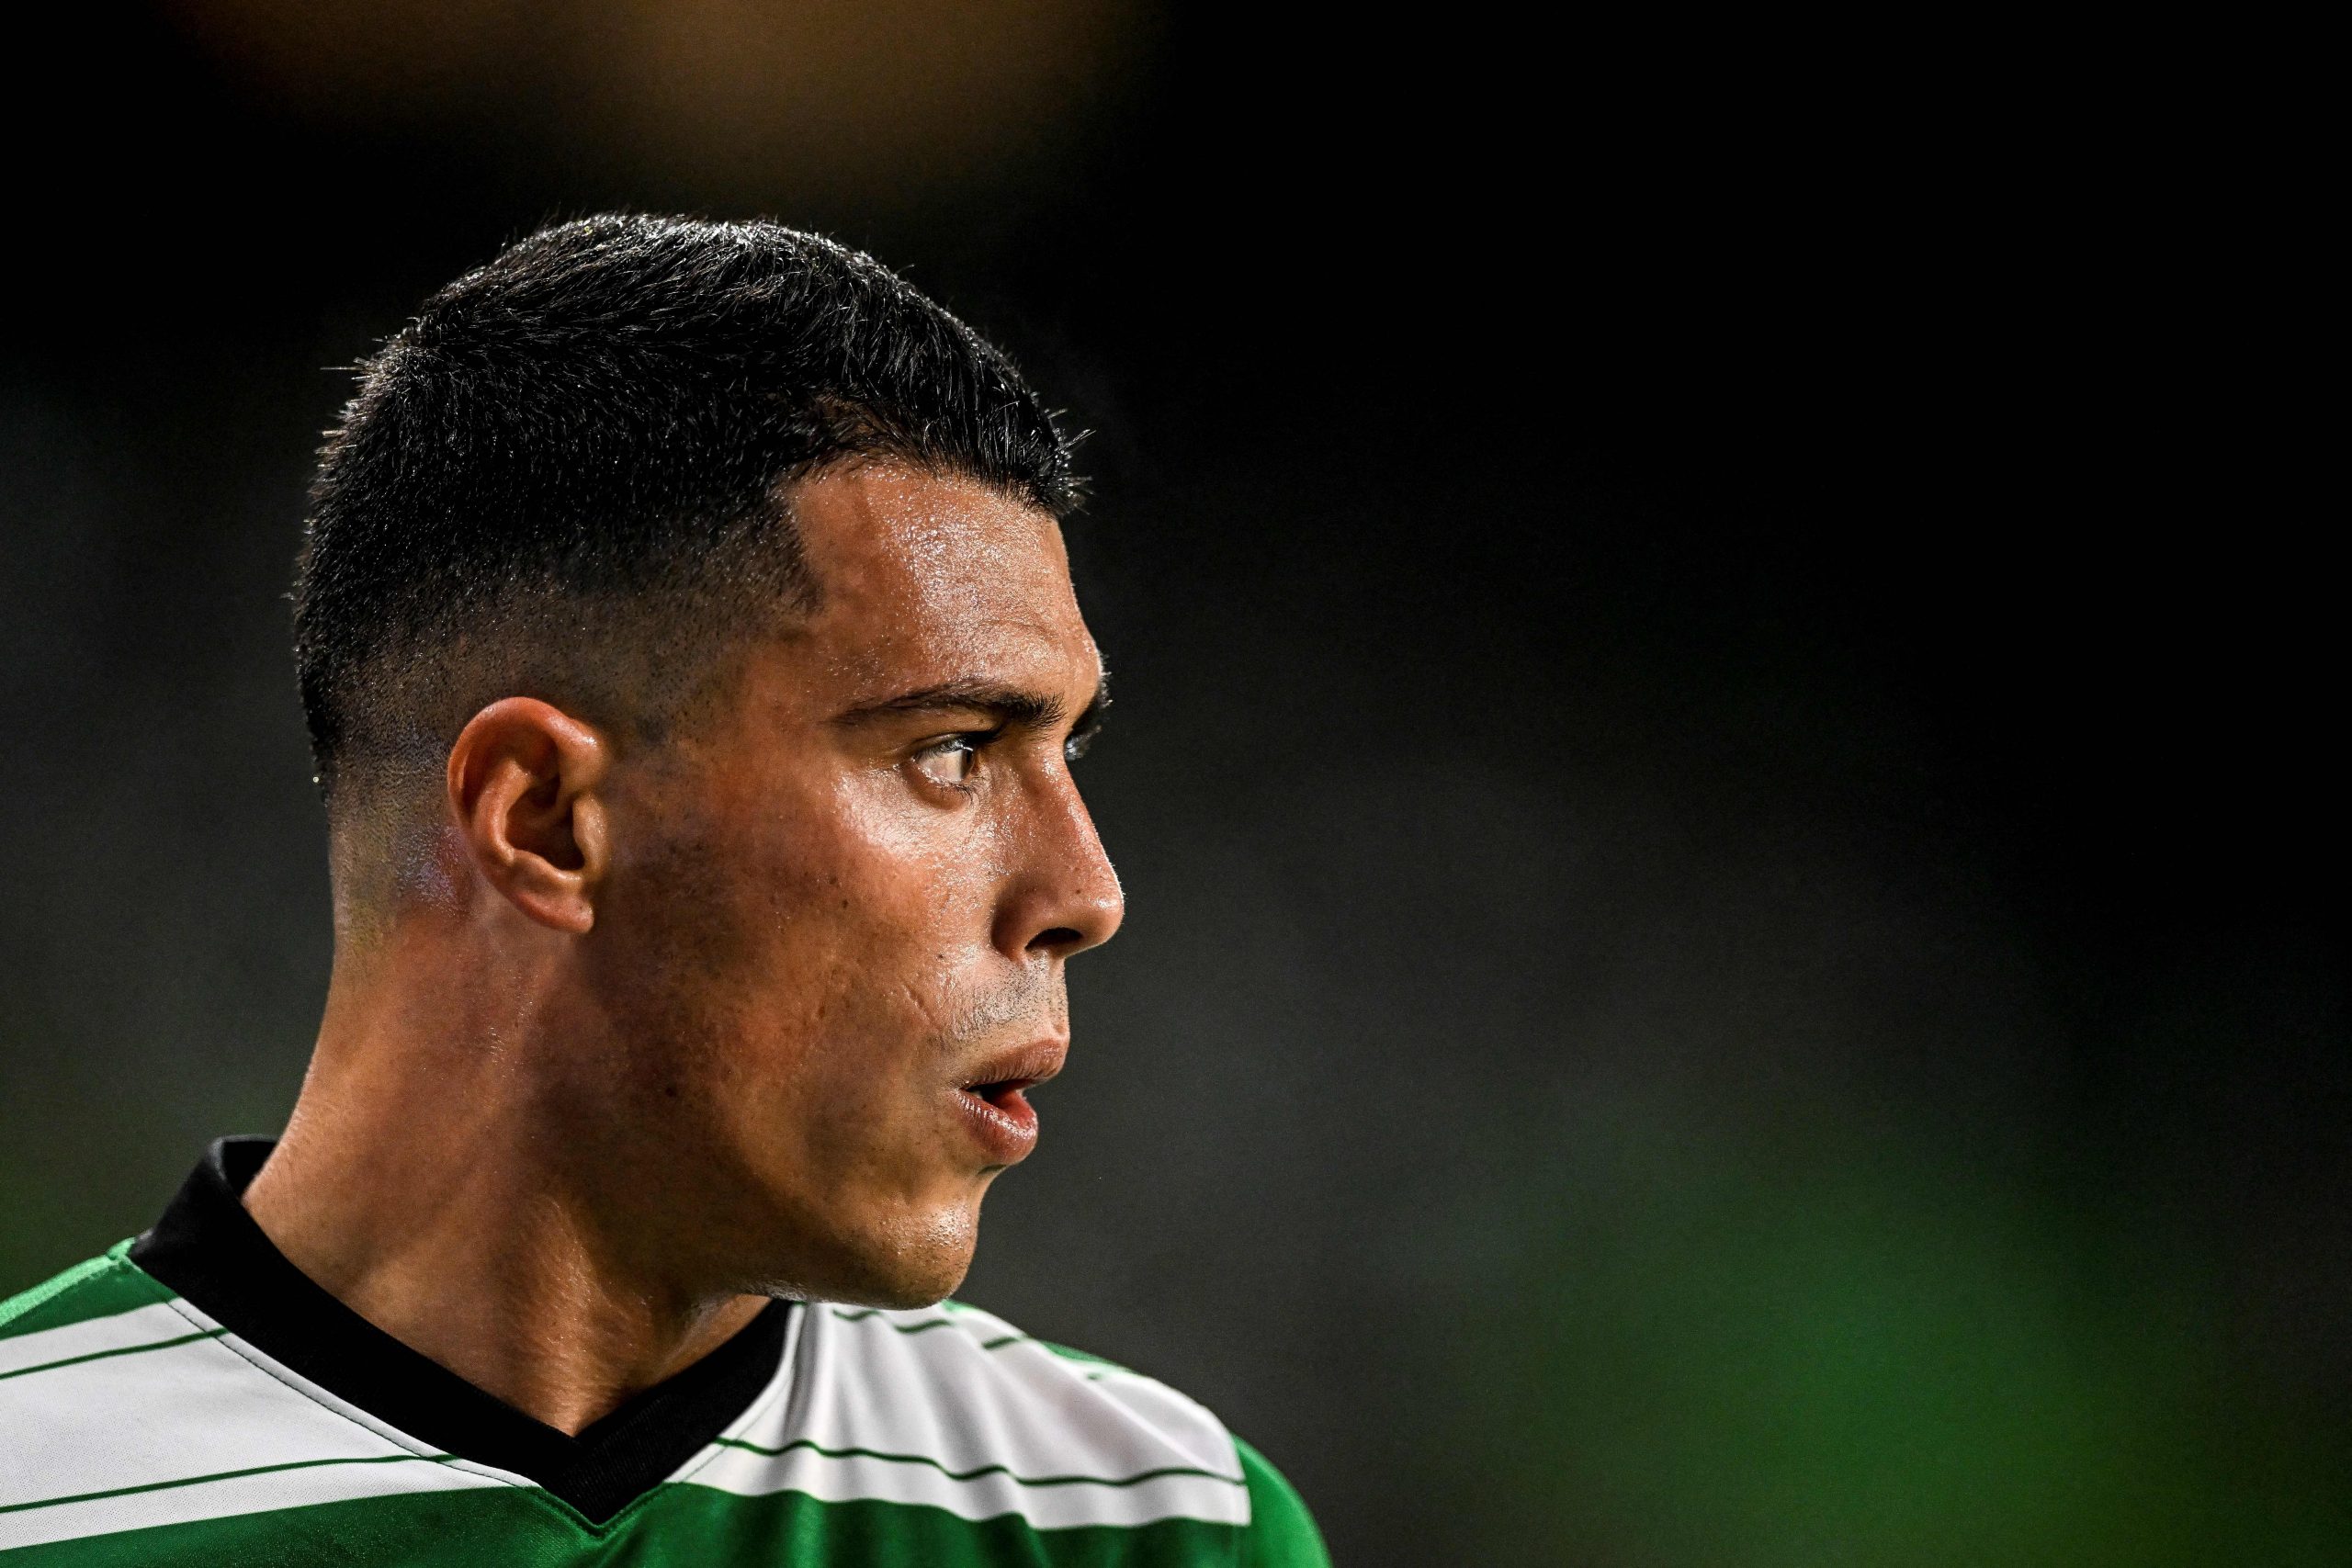 Sporting Lisbon's Spanish defender Pedro Porro looks on during the Portuguese league football match between Sporting CP and FC Vizela at the Jose Alvalade stadium in Lisbon on January 20, 2023.